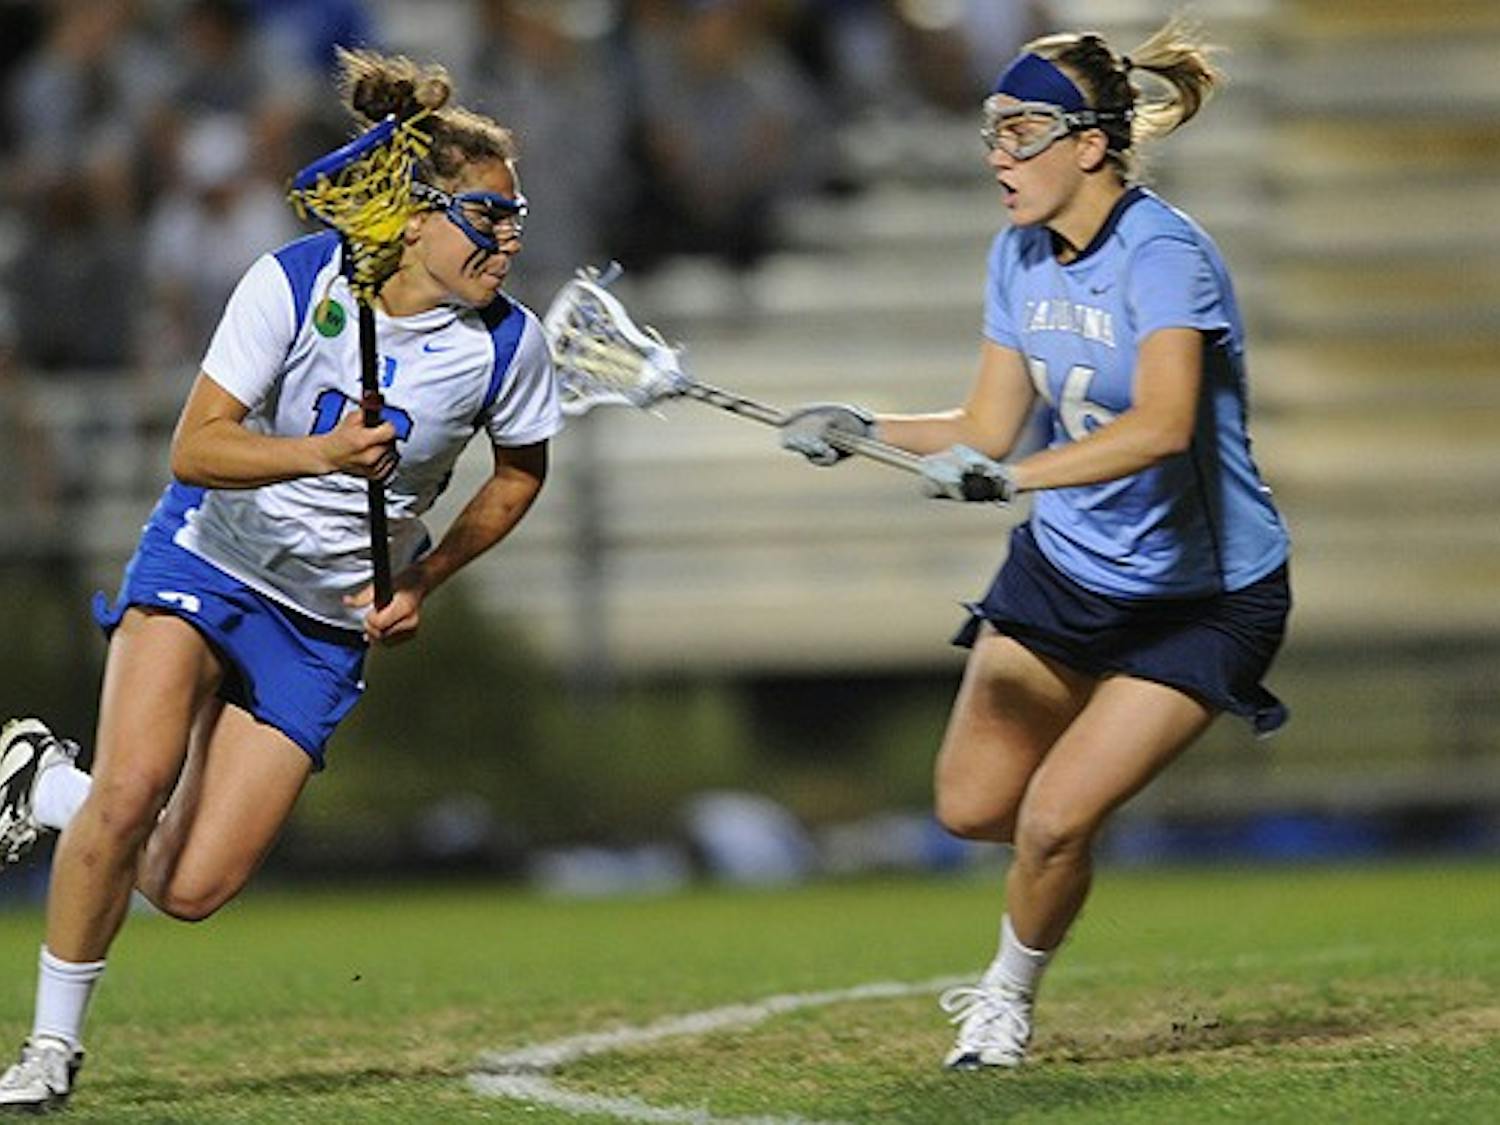 Kim Wenger scored four goals in Duke’s win, including a score in the second half that stopped a UNC run.